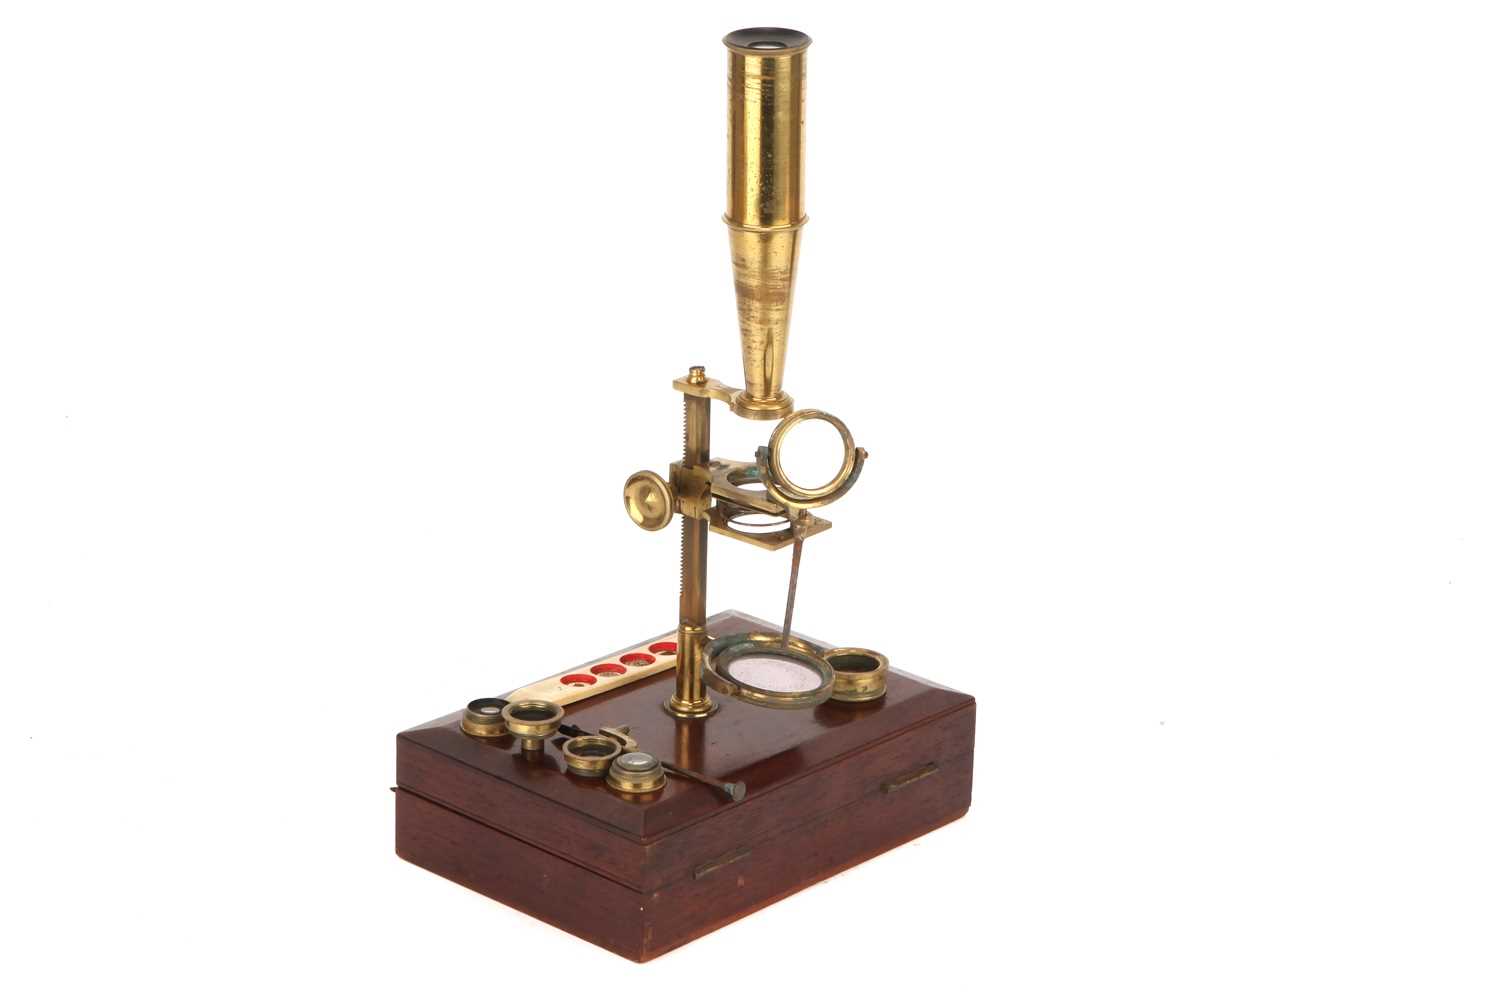 Lot 16 - A Gould-Type Microscope